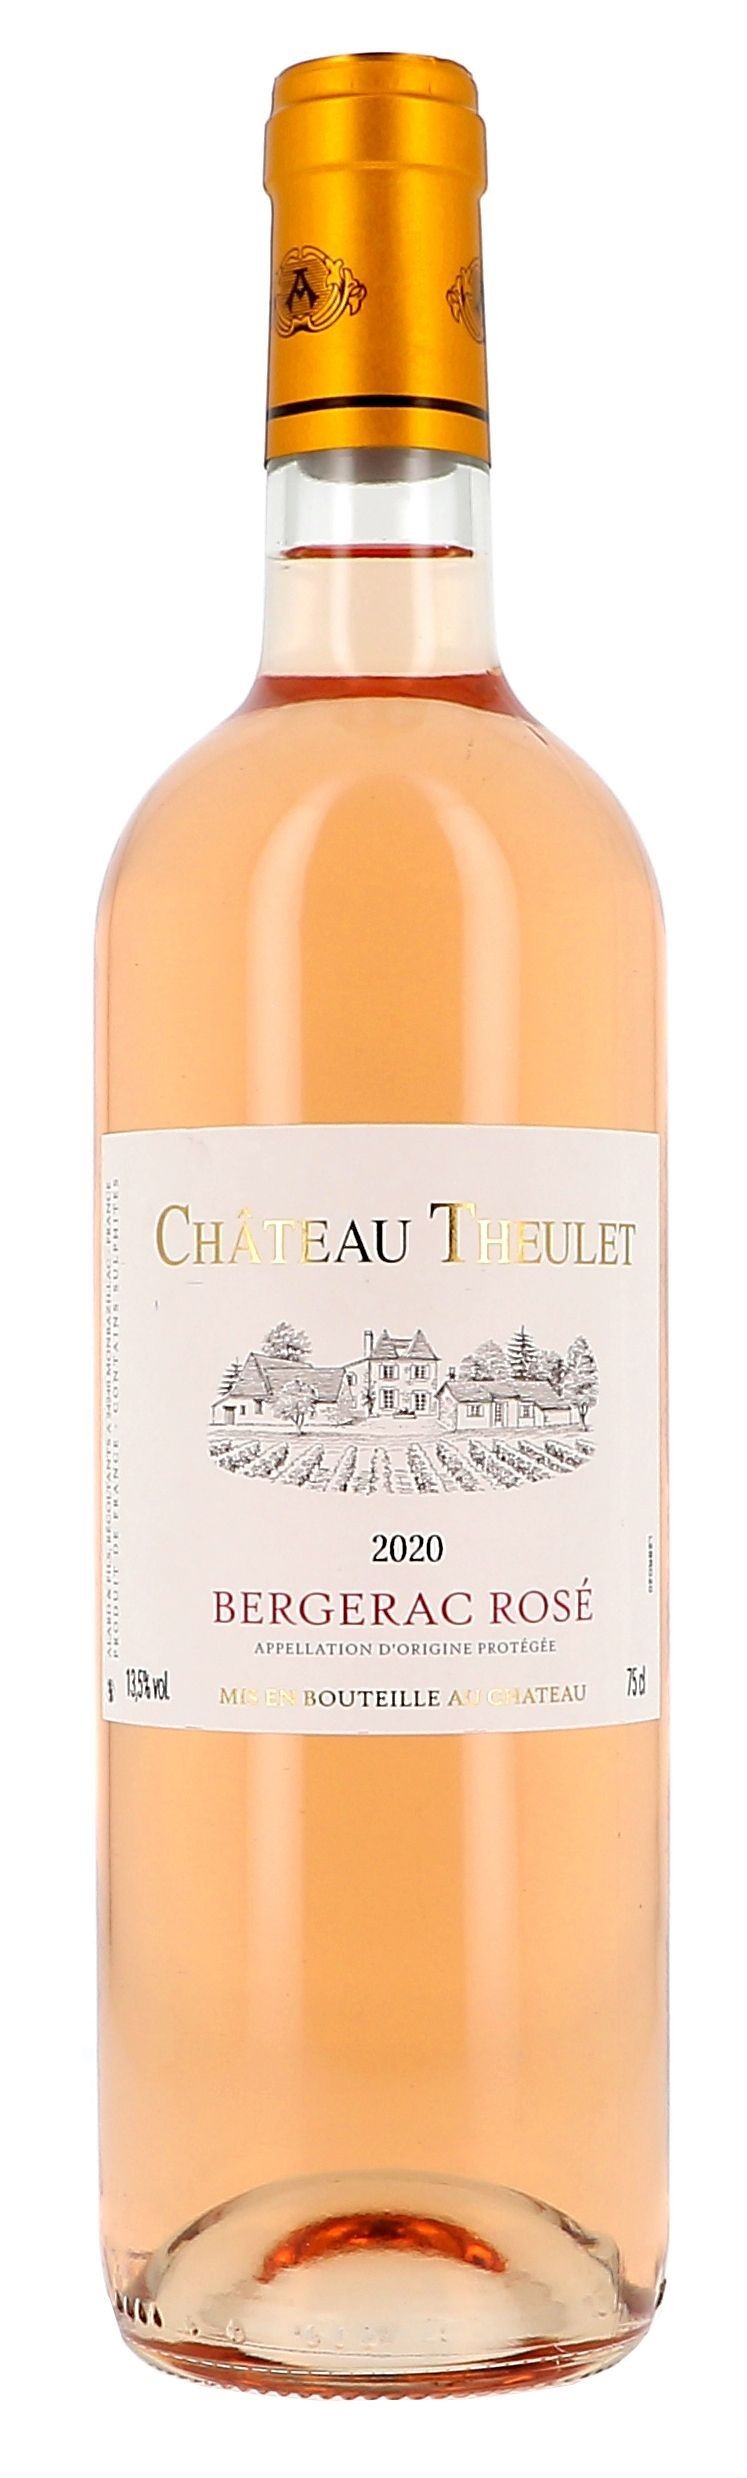 Bergerac rose Chateau Theulet 75cl 2009